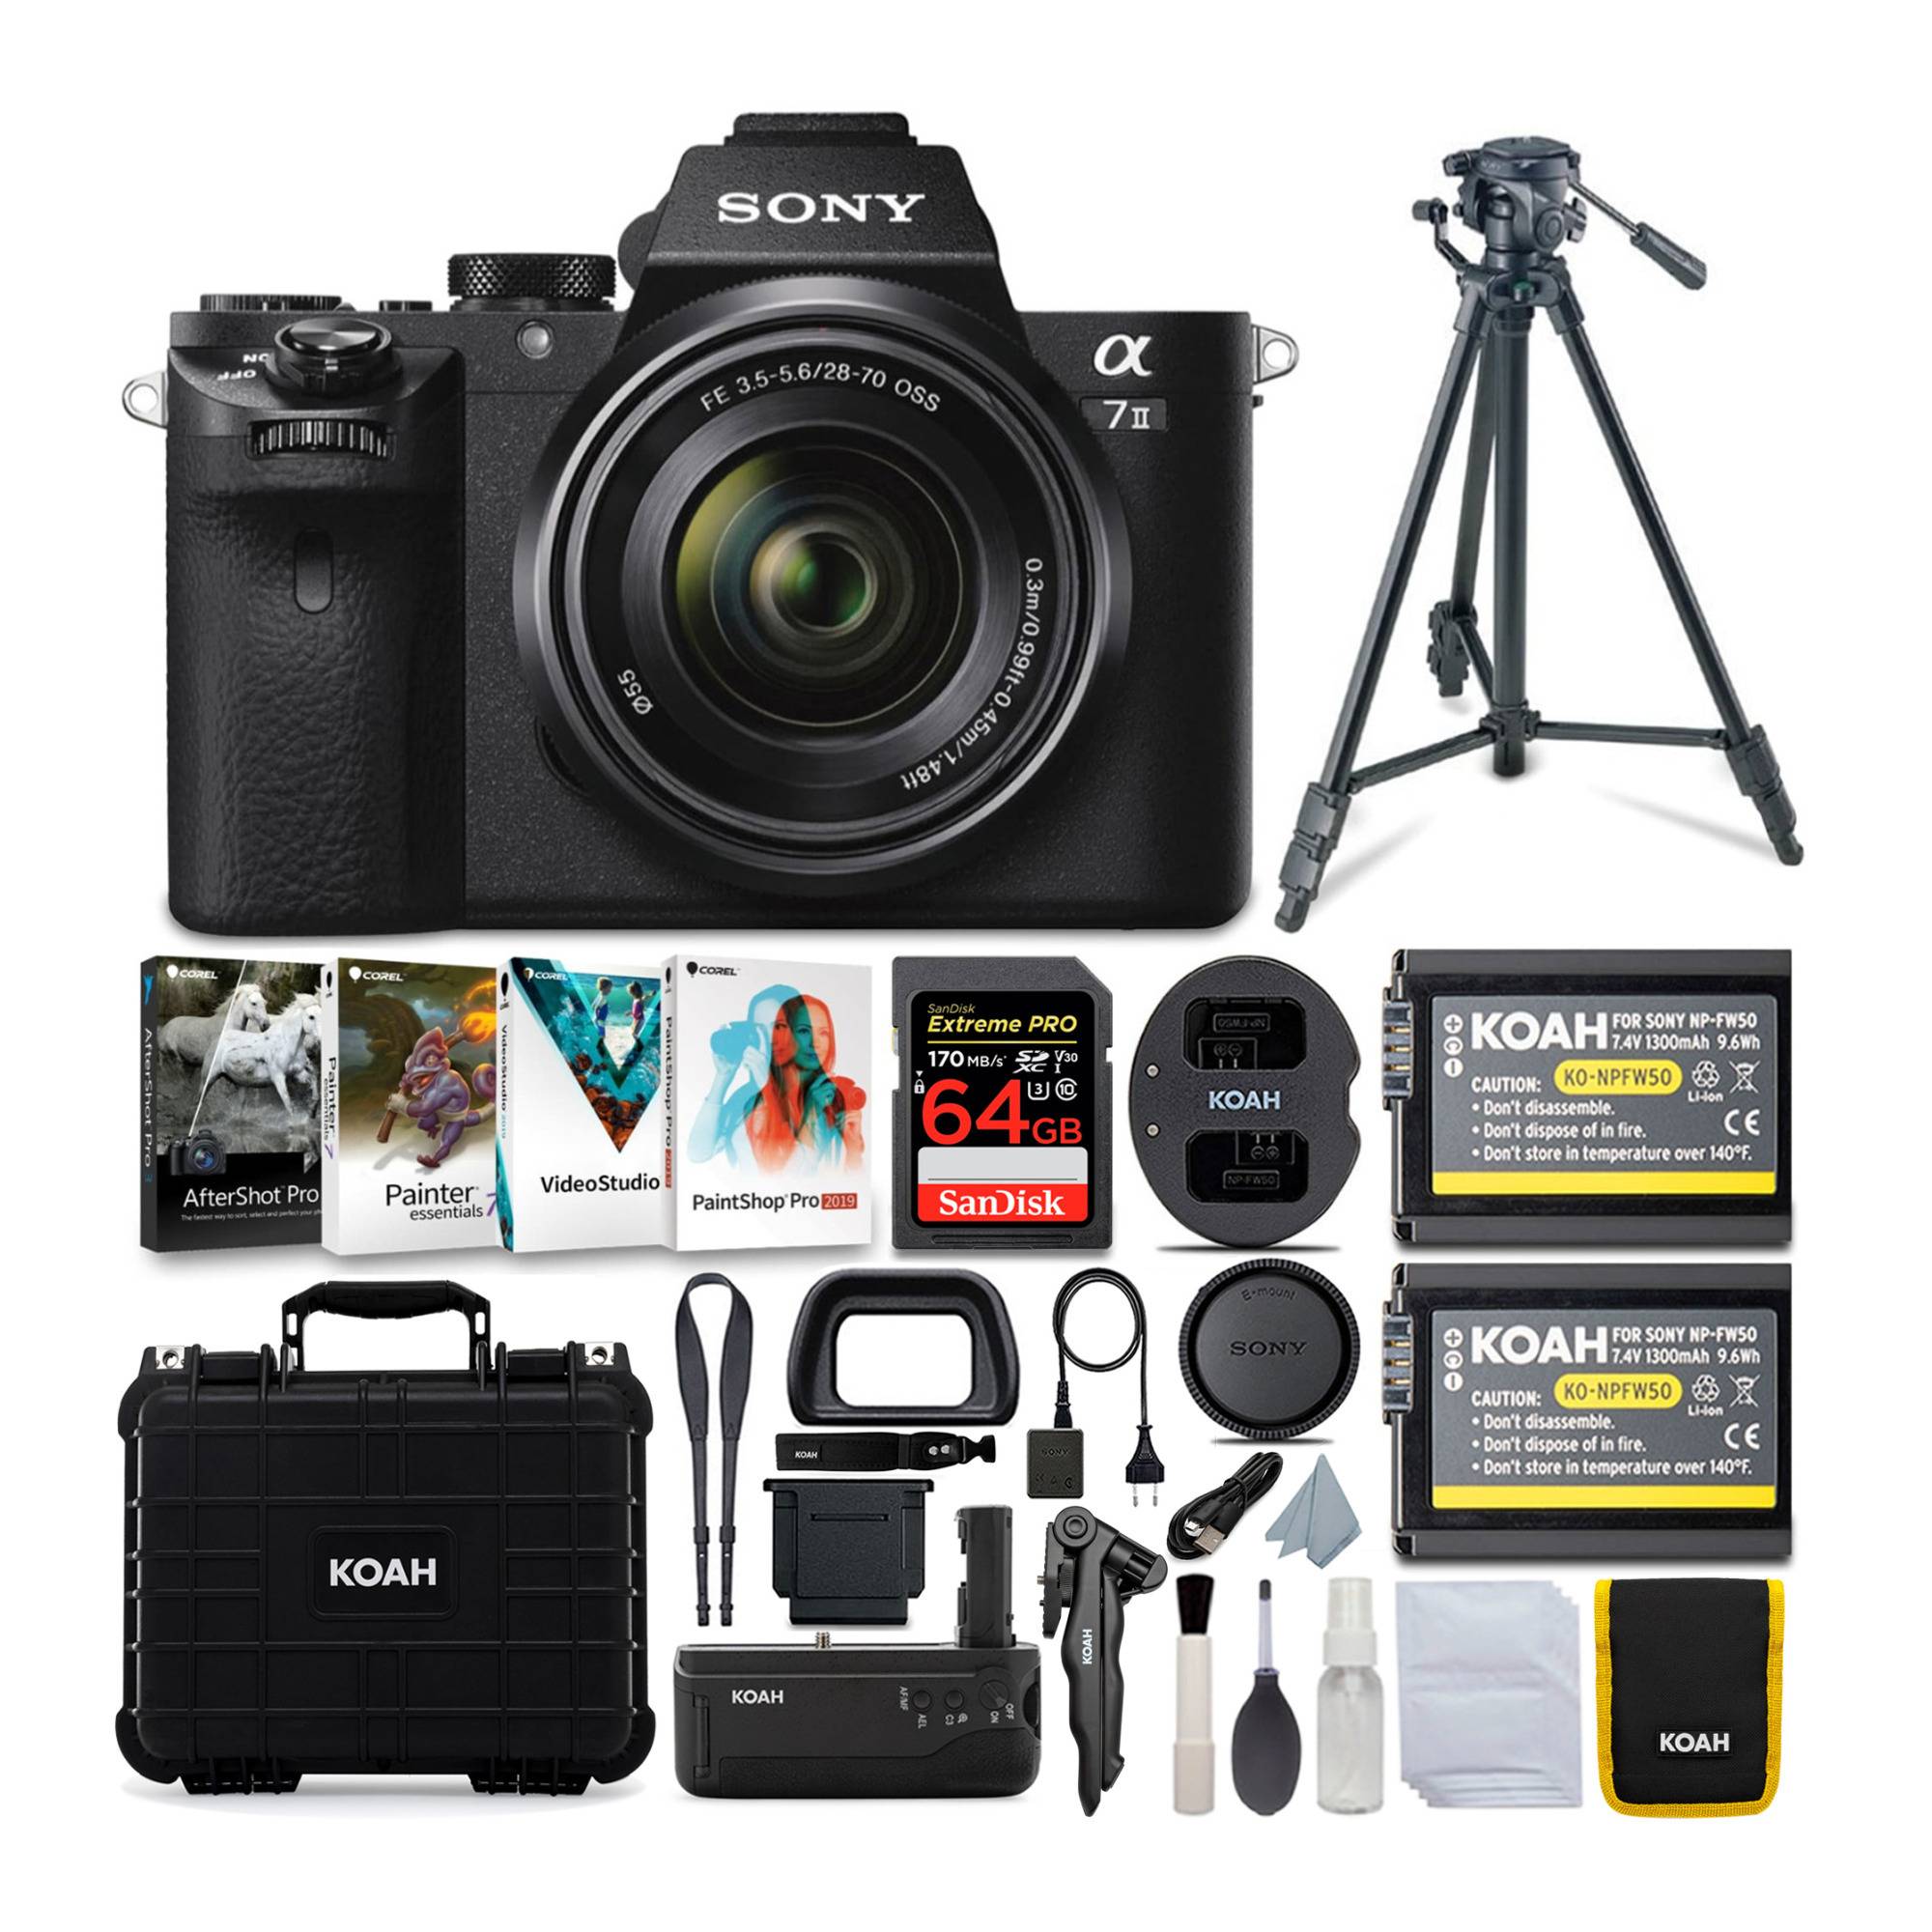 Sony Alpha a7 II Mirrorless Digital Camera with 28-70mm Lens, Custom Hard Case and Accessories Bundle